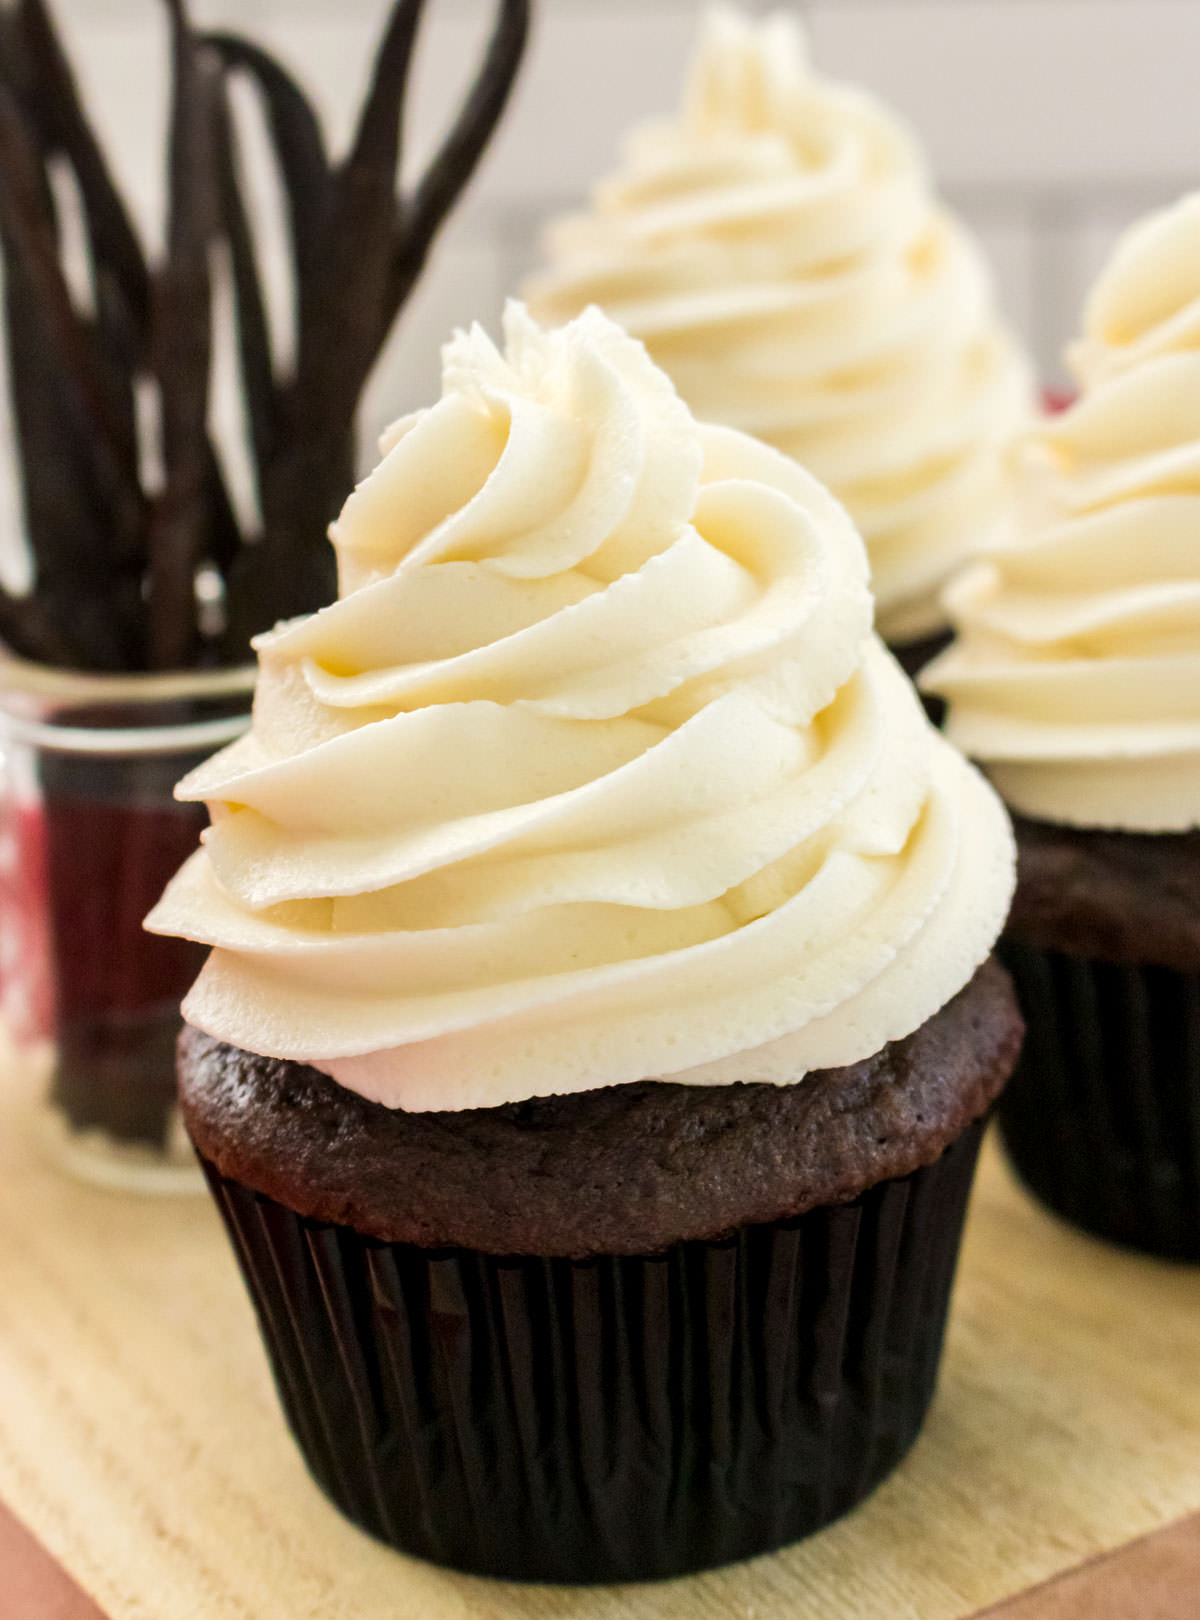 Closeup on a chocolate cupcake topped with The Best Buttercream Frosting sitting on a cutting board next to a jar filled with Vanilla Beans.